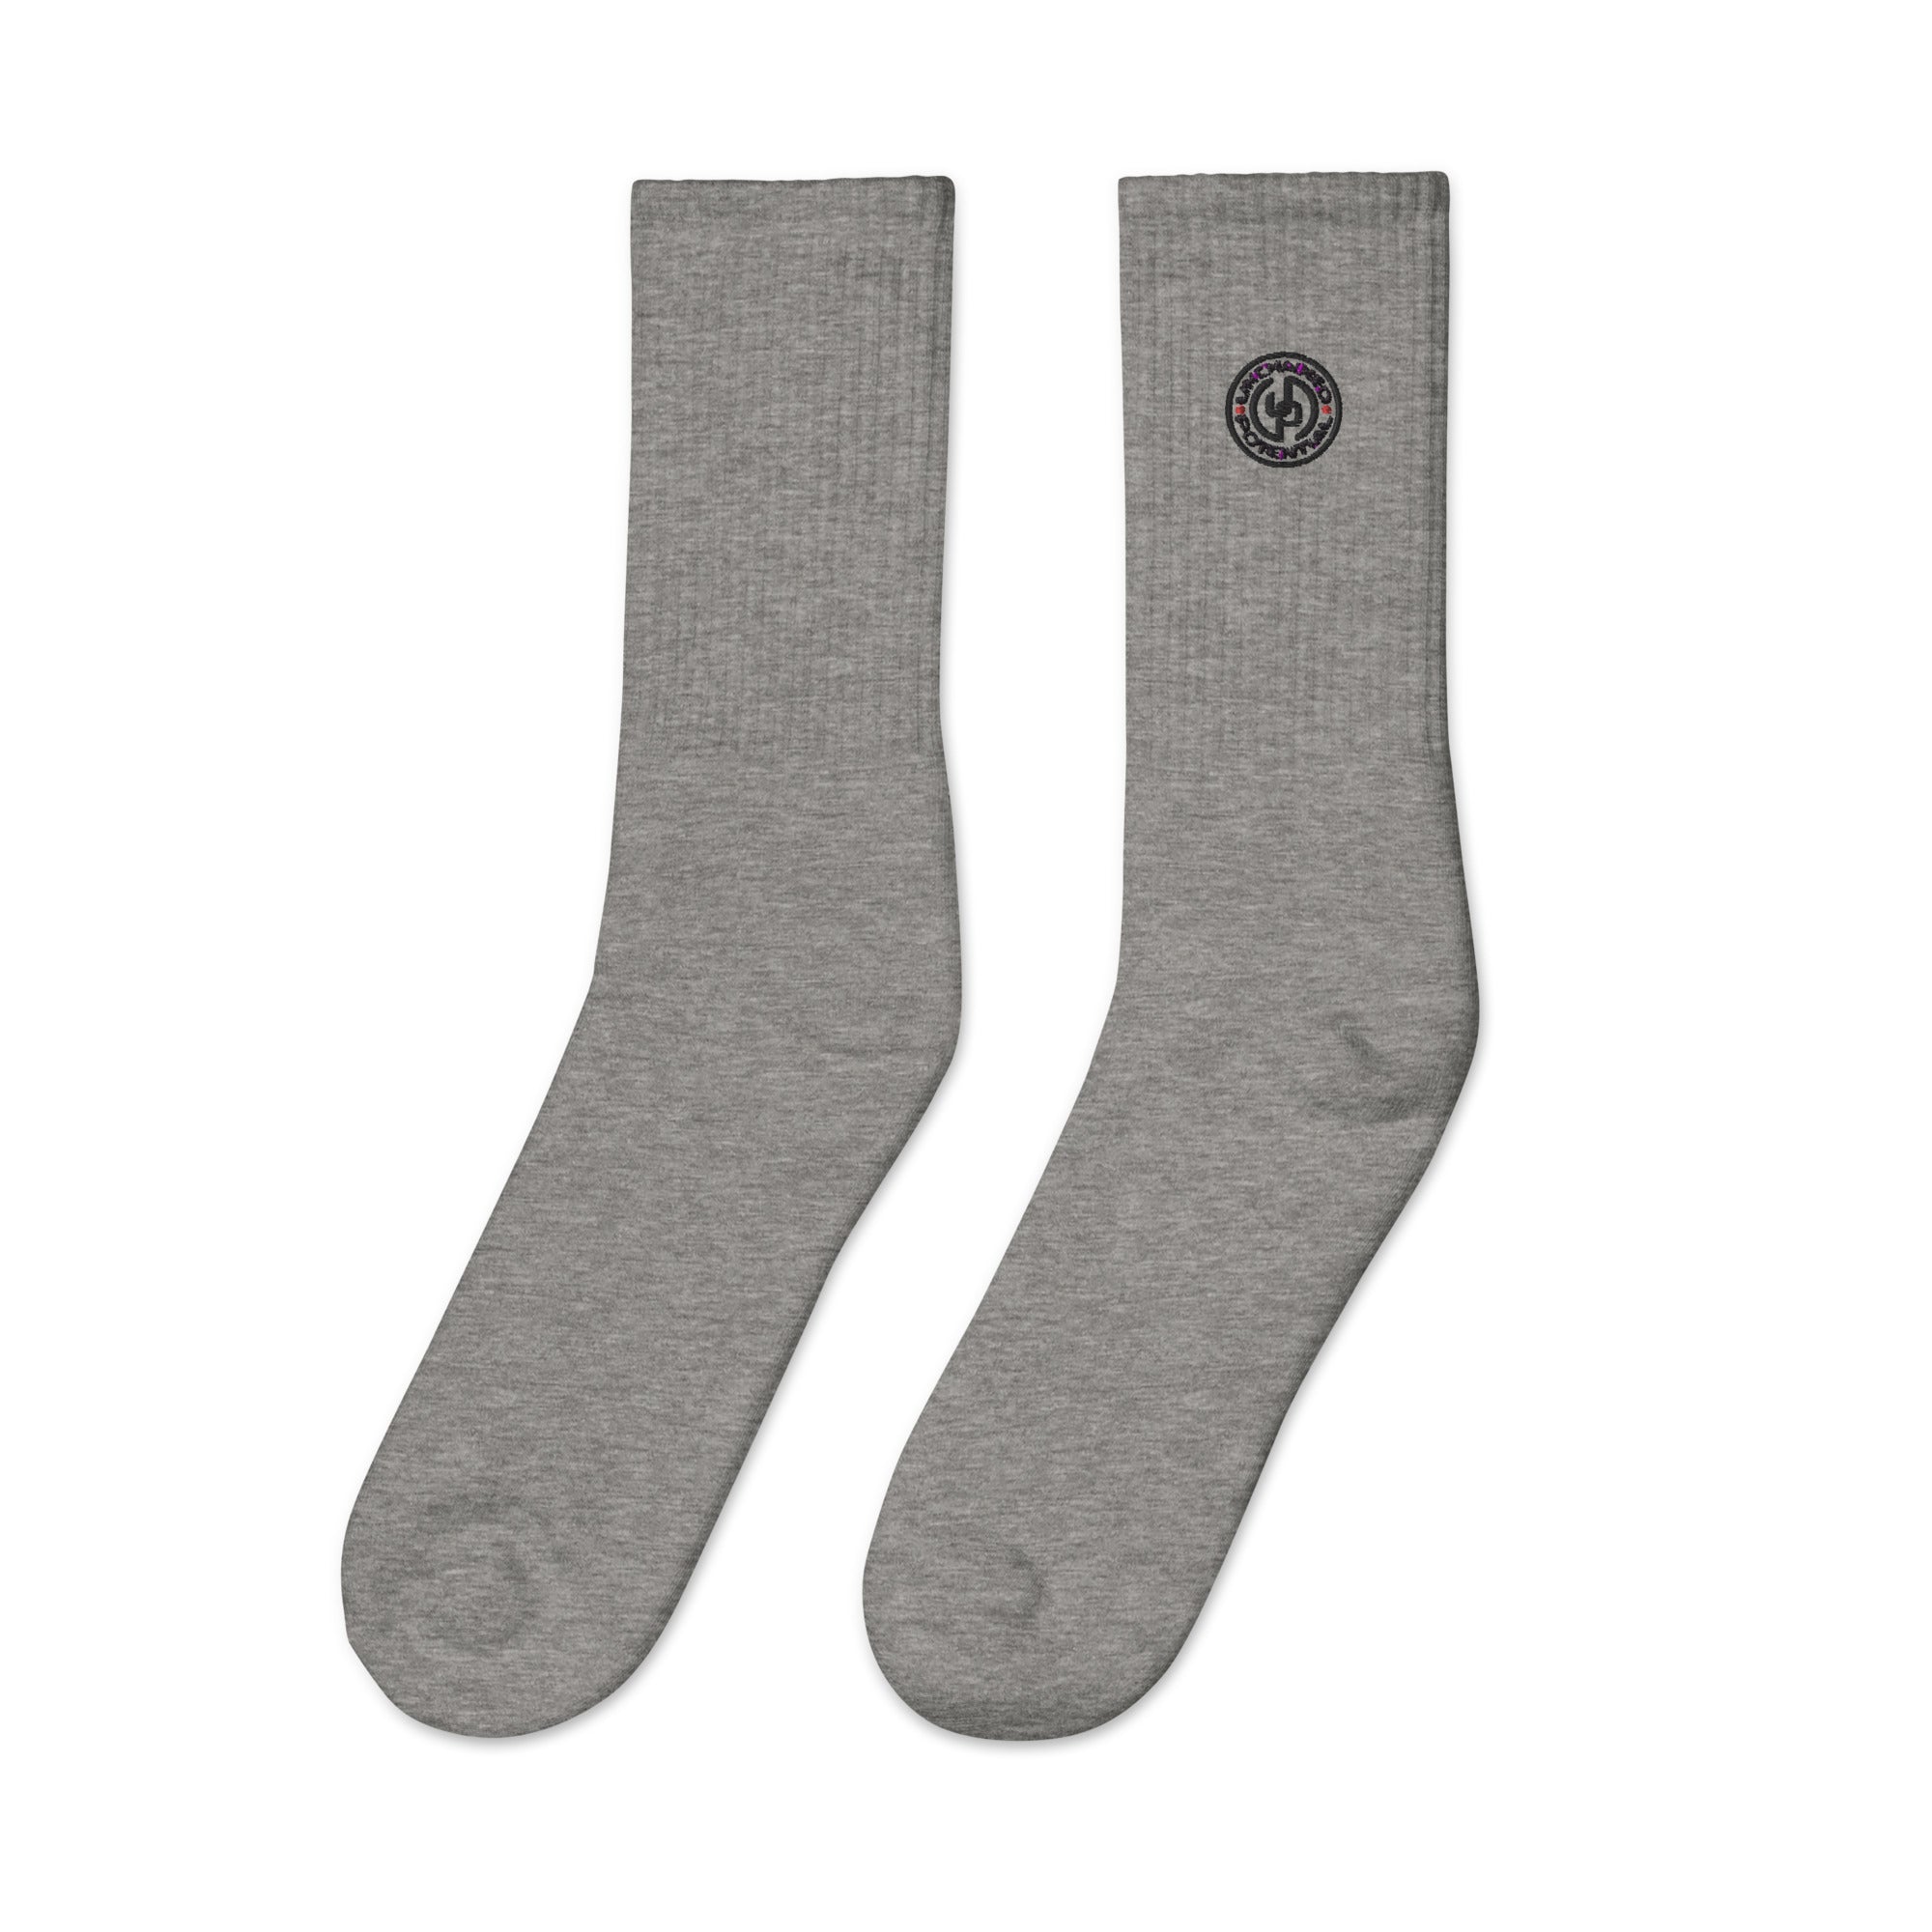 Unchained Potential Embroidered socks